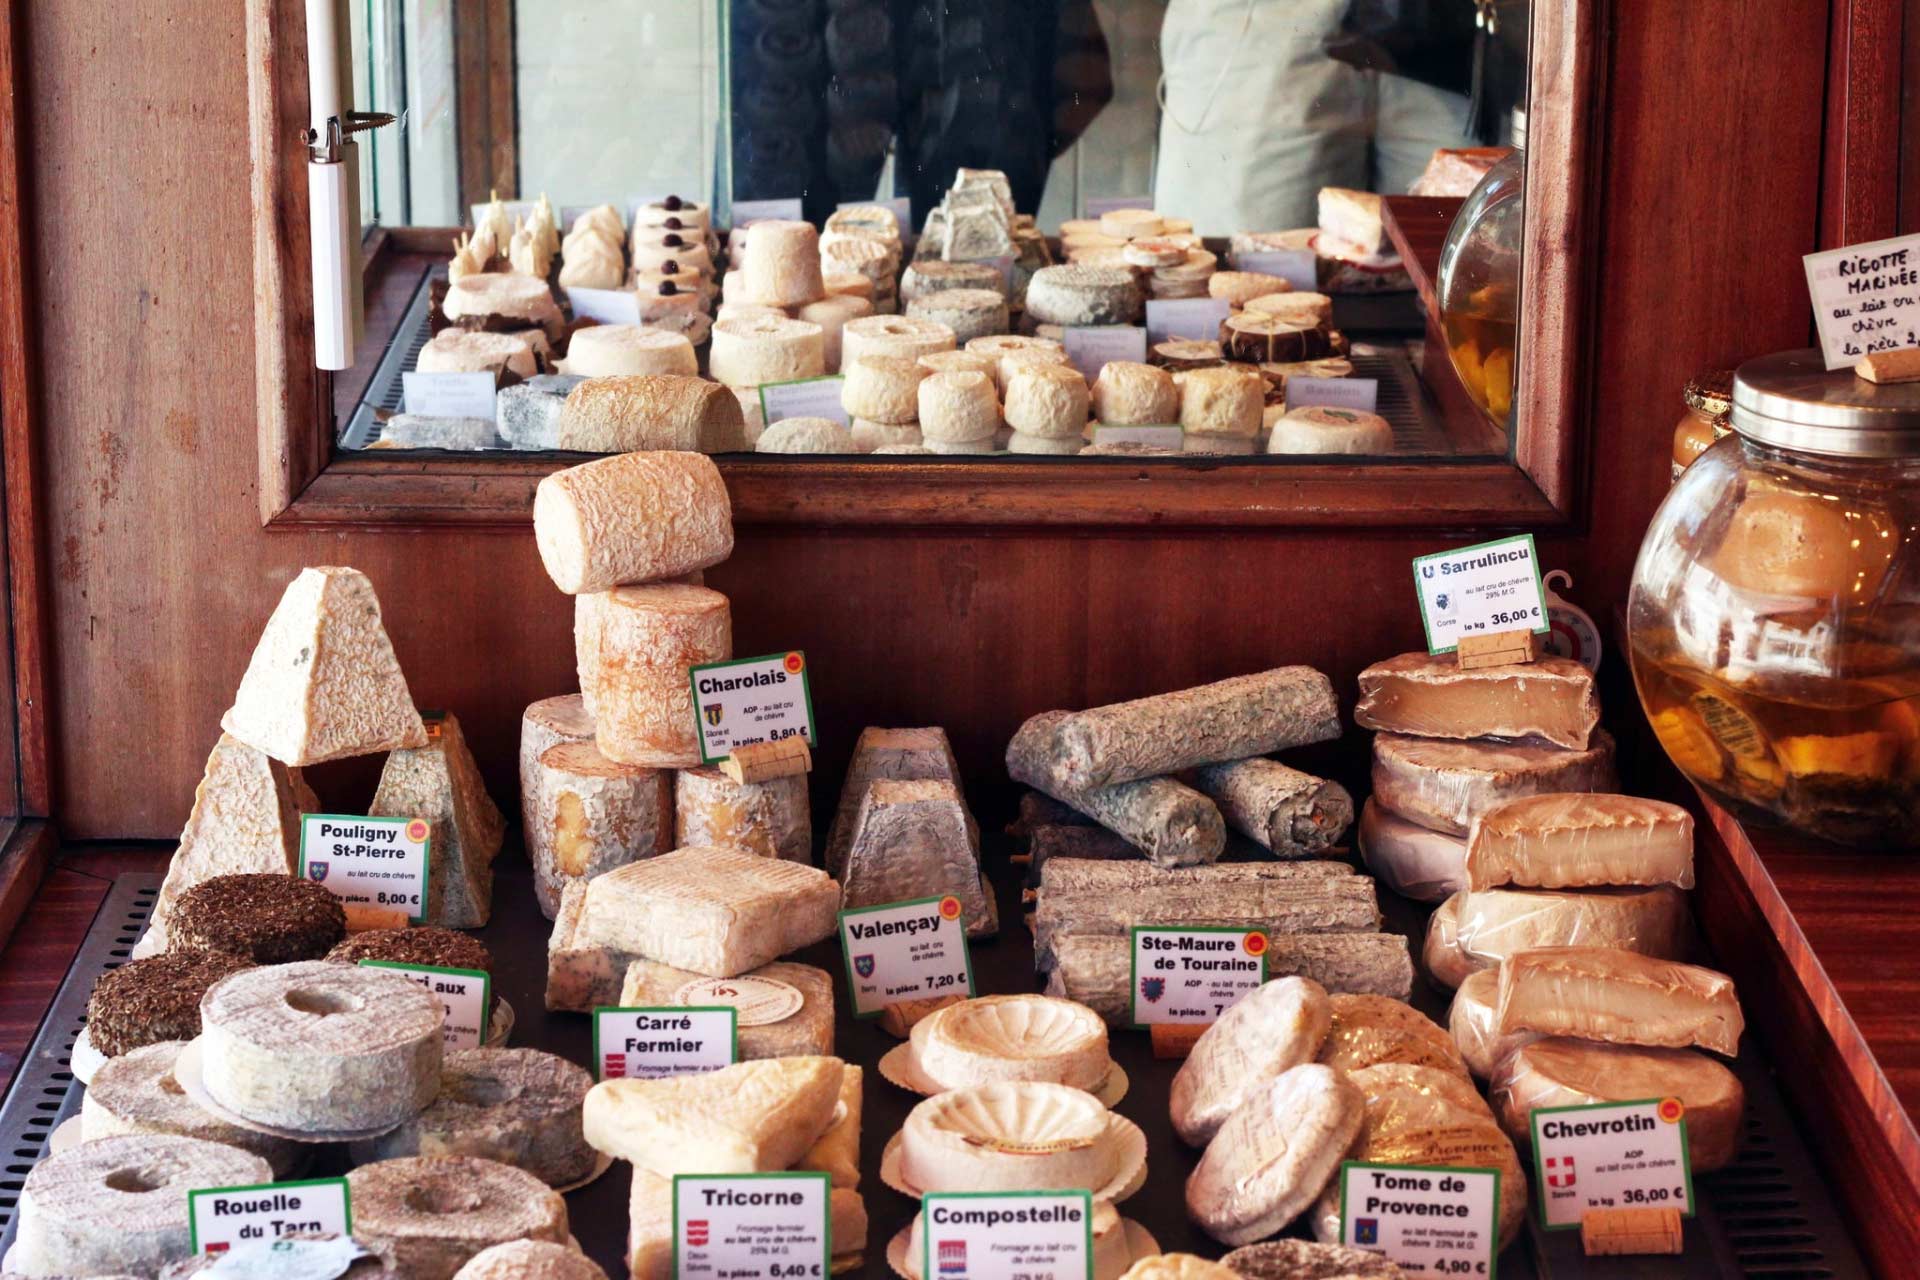 Peering inside a well-stocked cheese shop with various cheese wheels and signs showing cheese name and price.